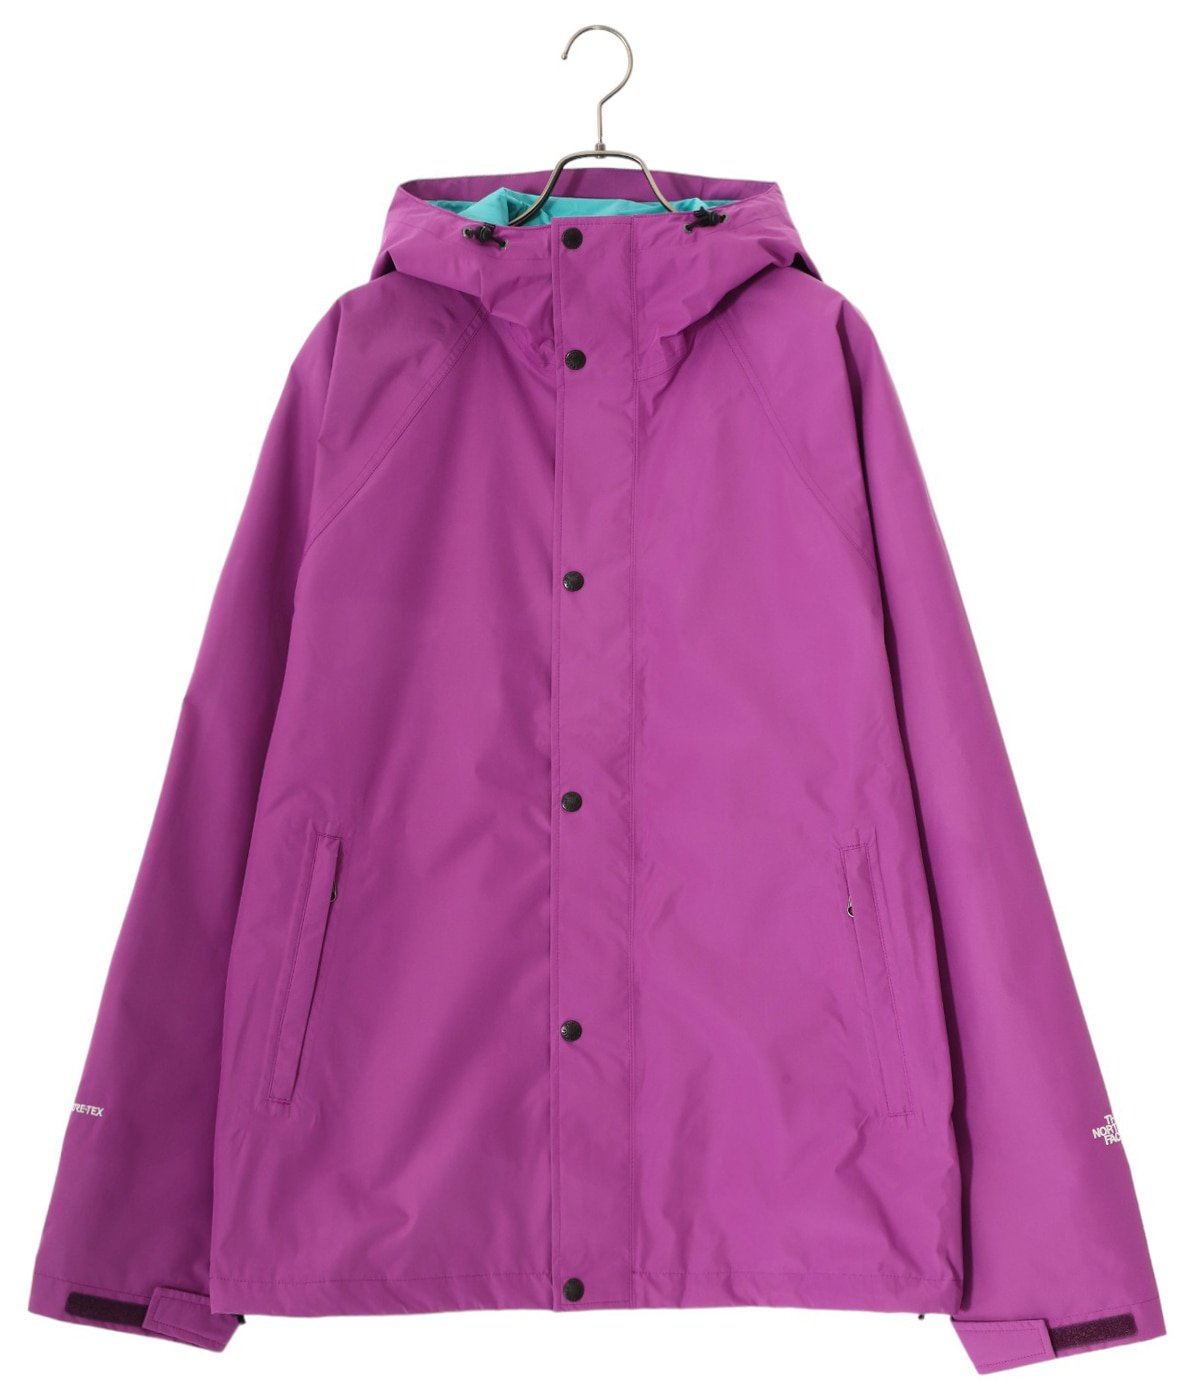 THE NORTH FACE / ザ ノースフェイス ： Stow Away Jacket / 全4色 ： NP12435